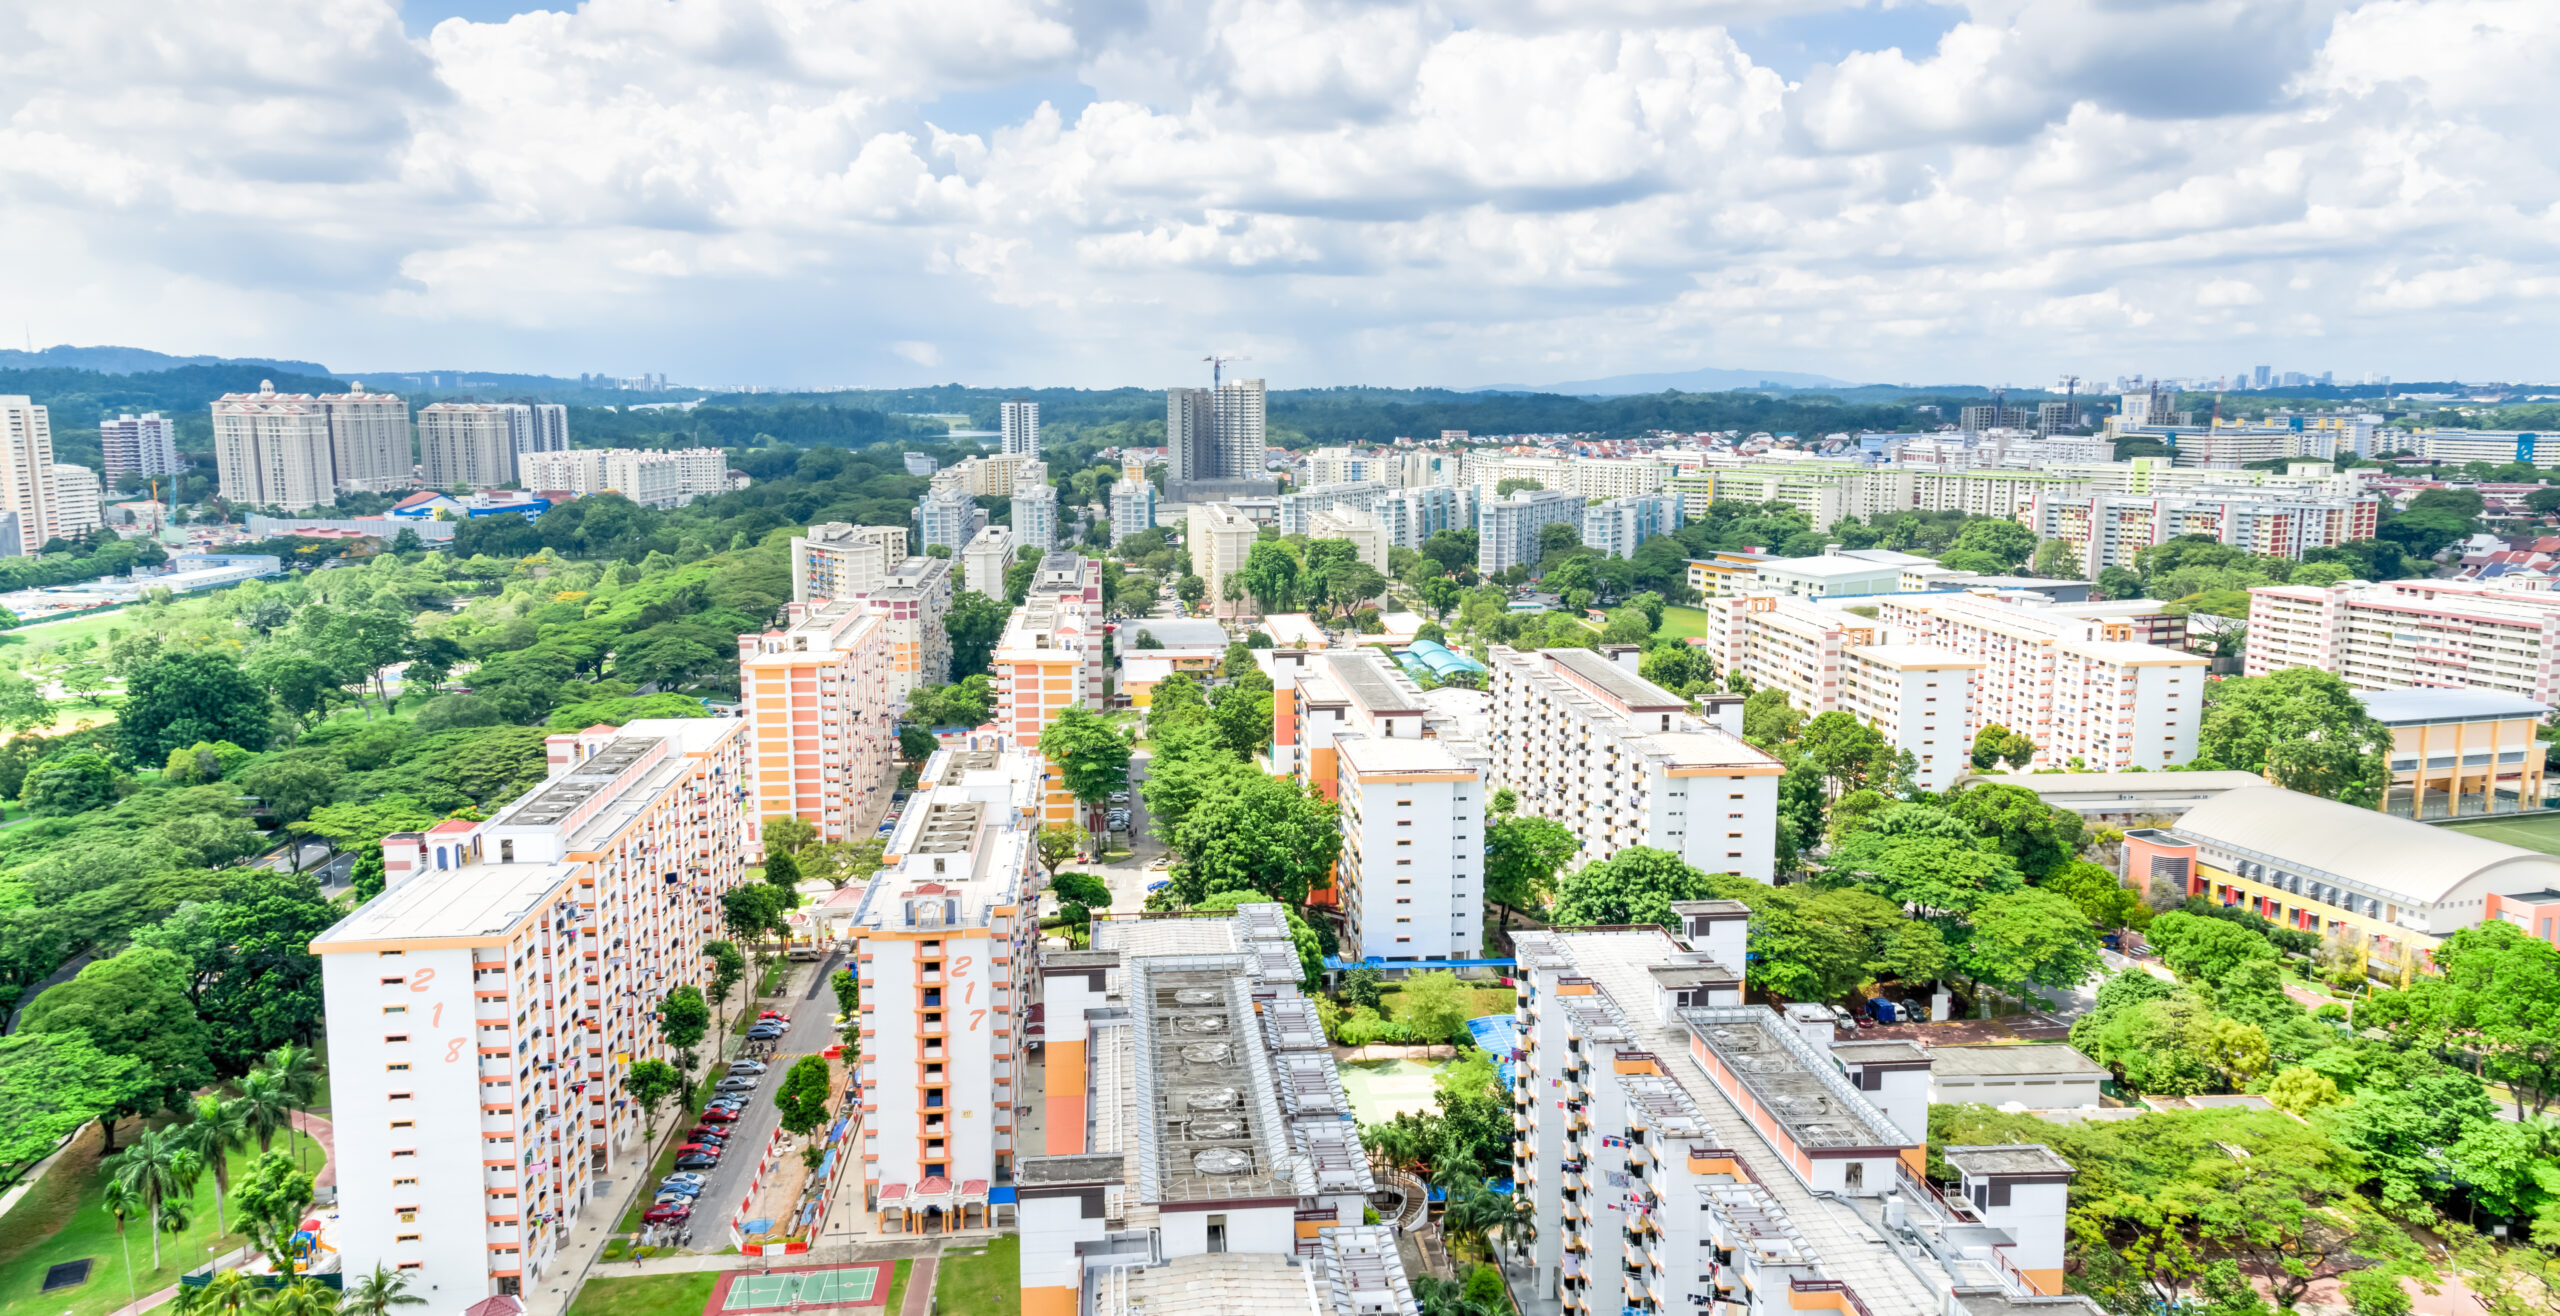 An overview of Ang Mo Kio’s landscape and greenery